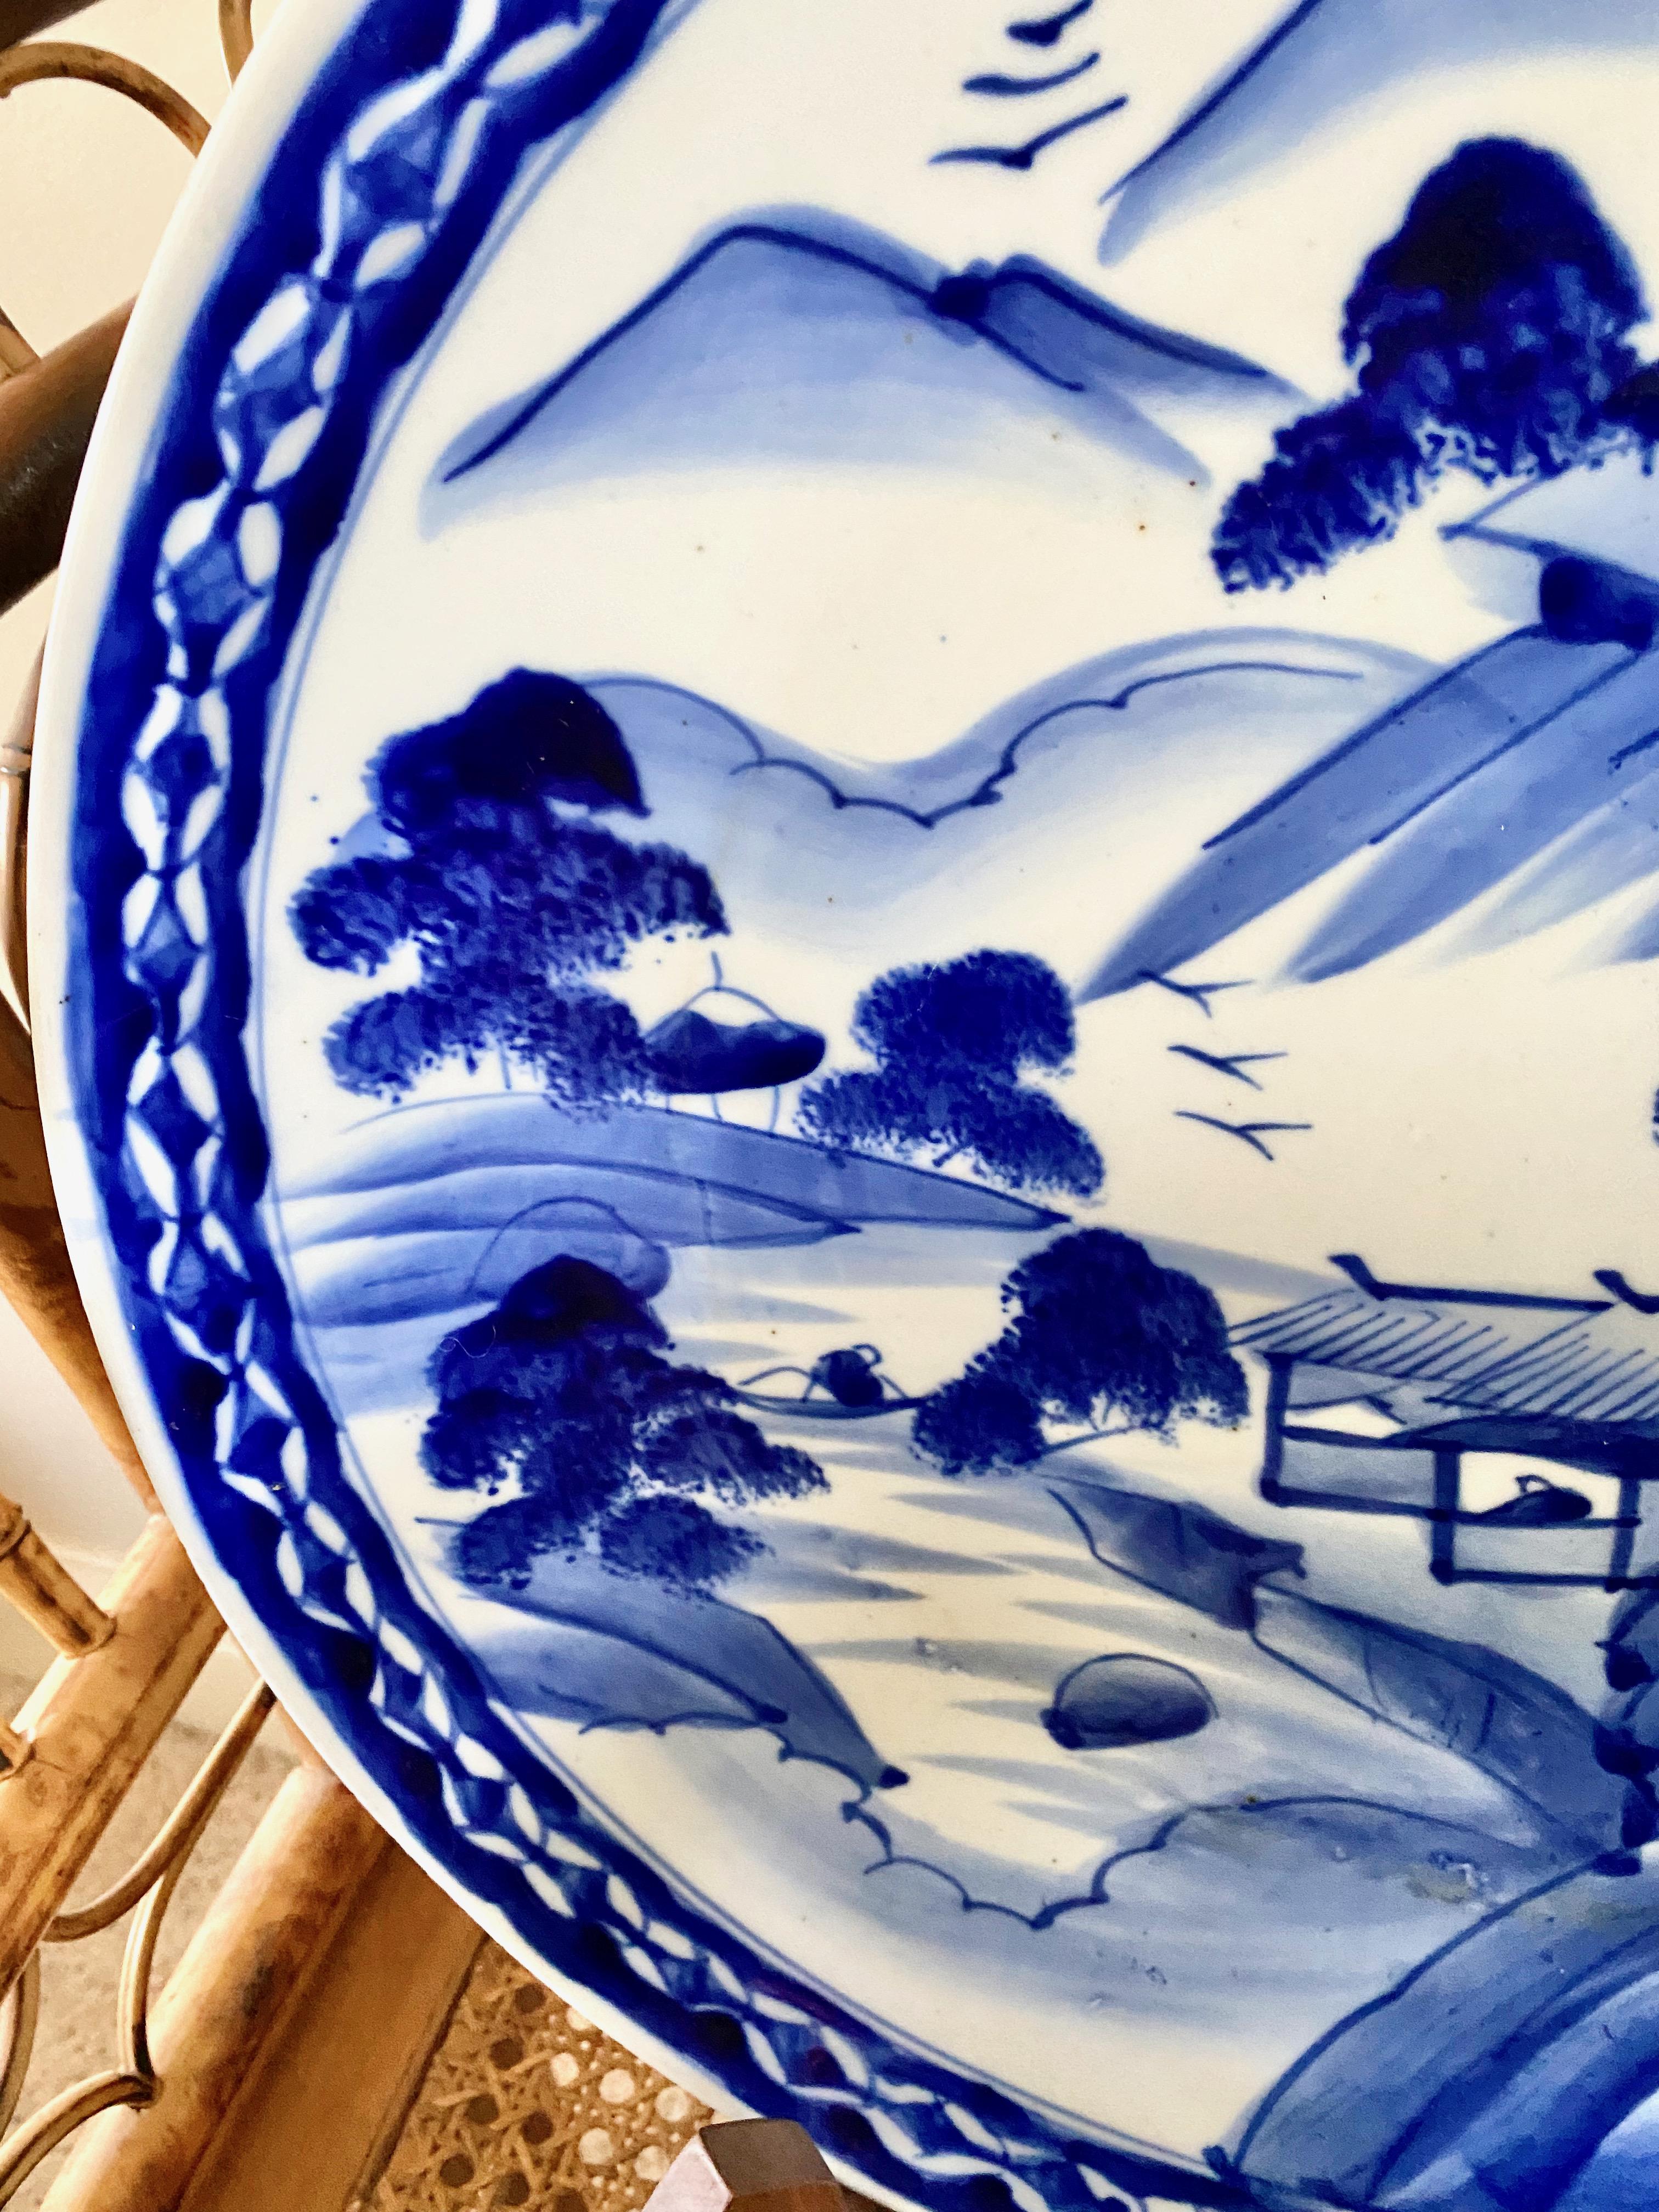 This is charming large mid-20th century Japanese Arita blue & white charger that depicts a country mountain scene. The charger would make a great addition to a country kitchen or breakfast room. The charger is in overall very good to excellent